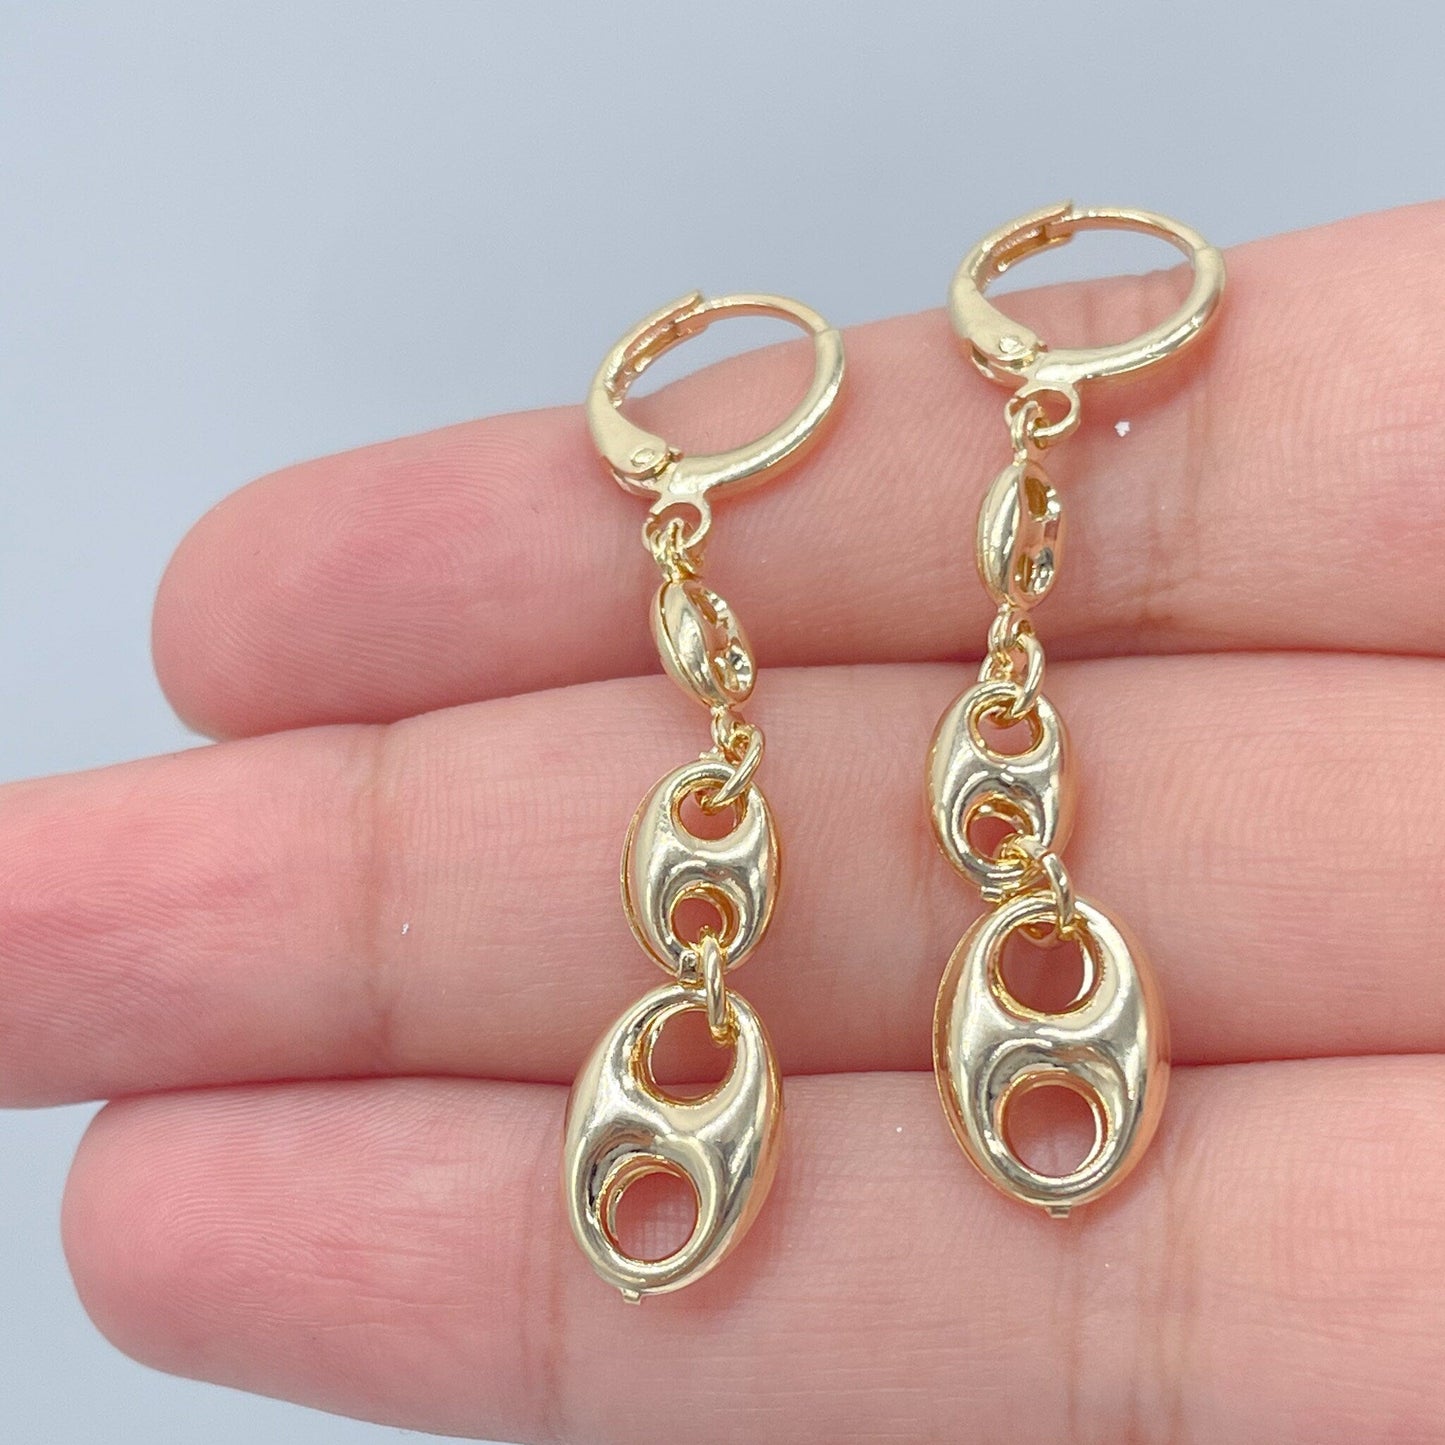 18k Gold Layered Three Mariner Link Dangling Earrings In A Leverback Jewelry